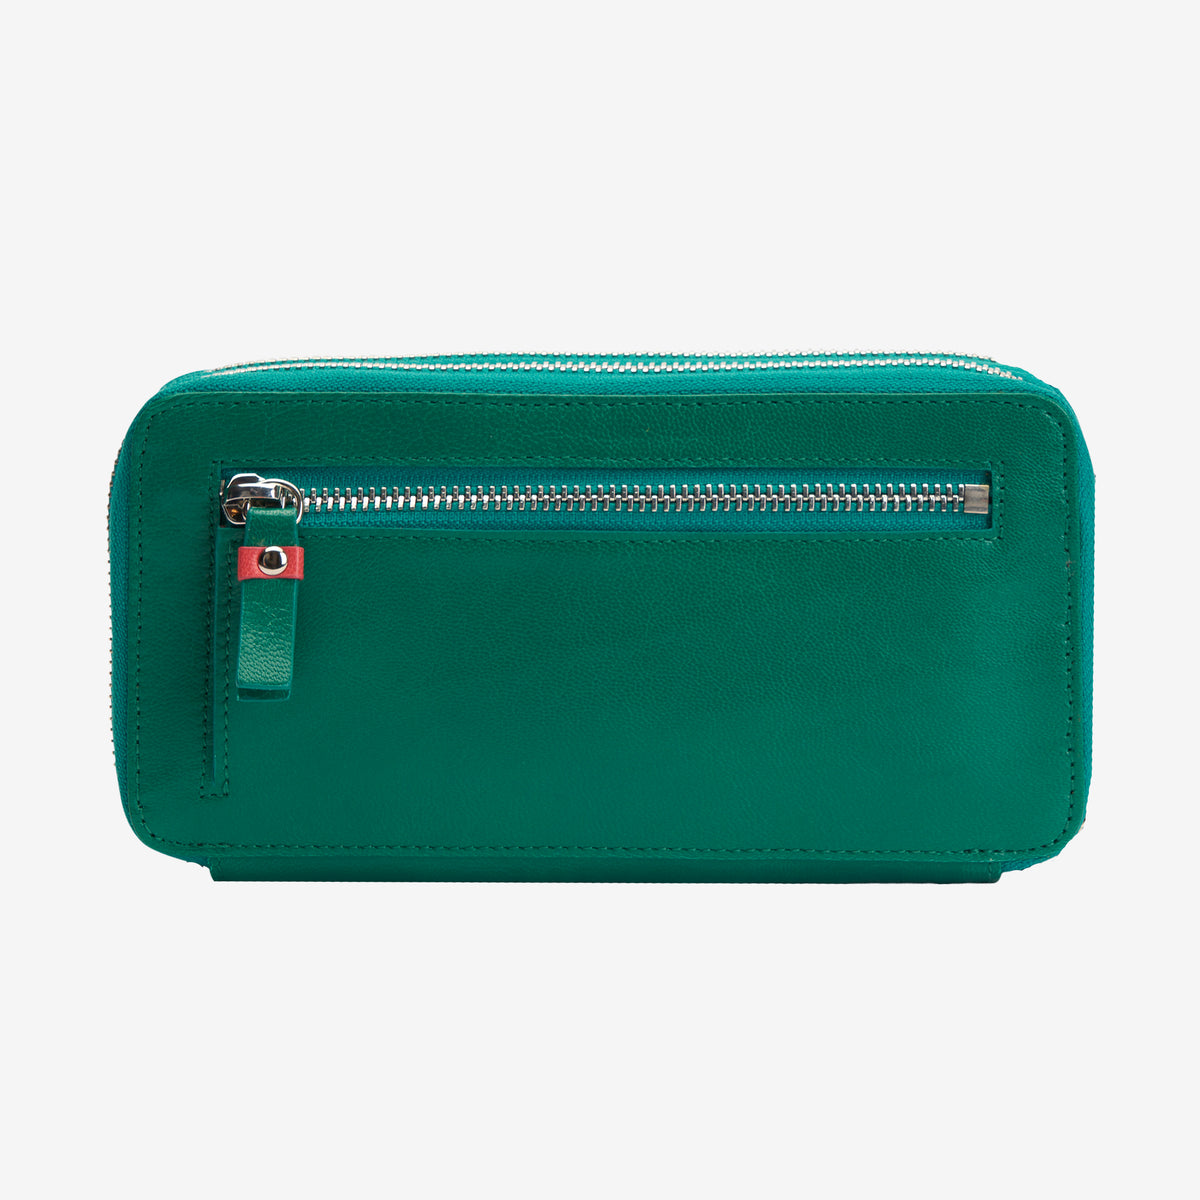 tusk-443-leather-double-zip-wallet-emerald-and-geranium-back